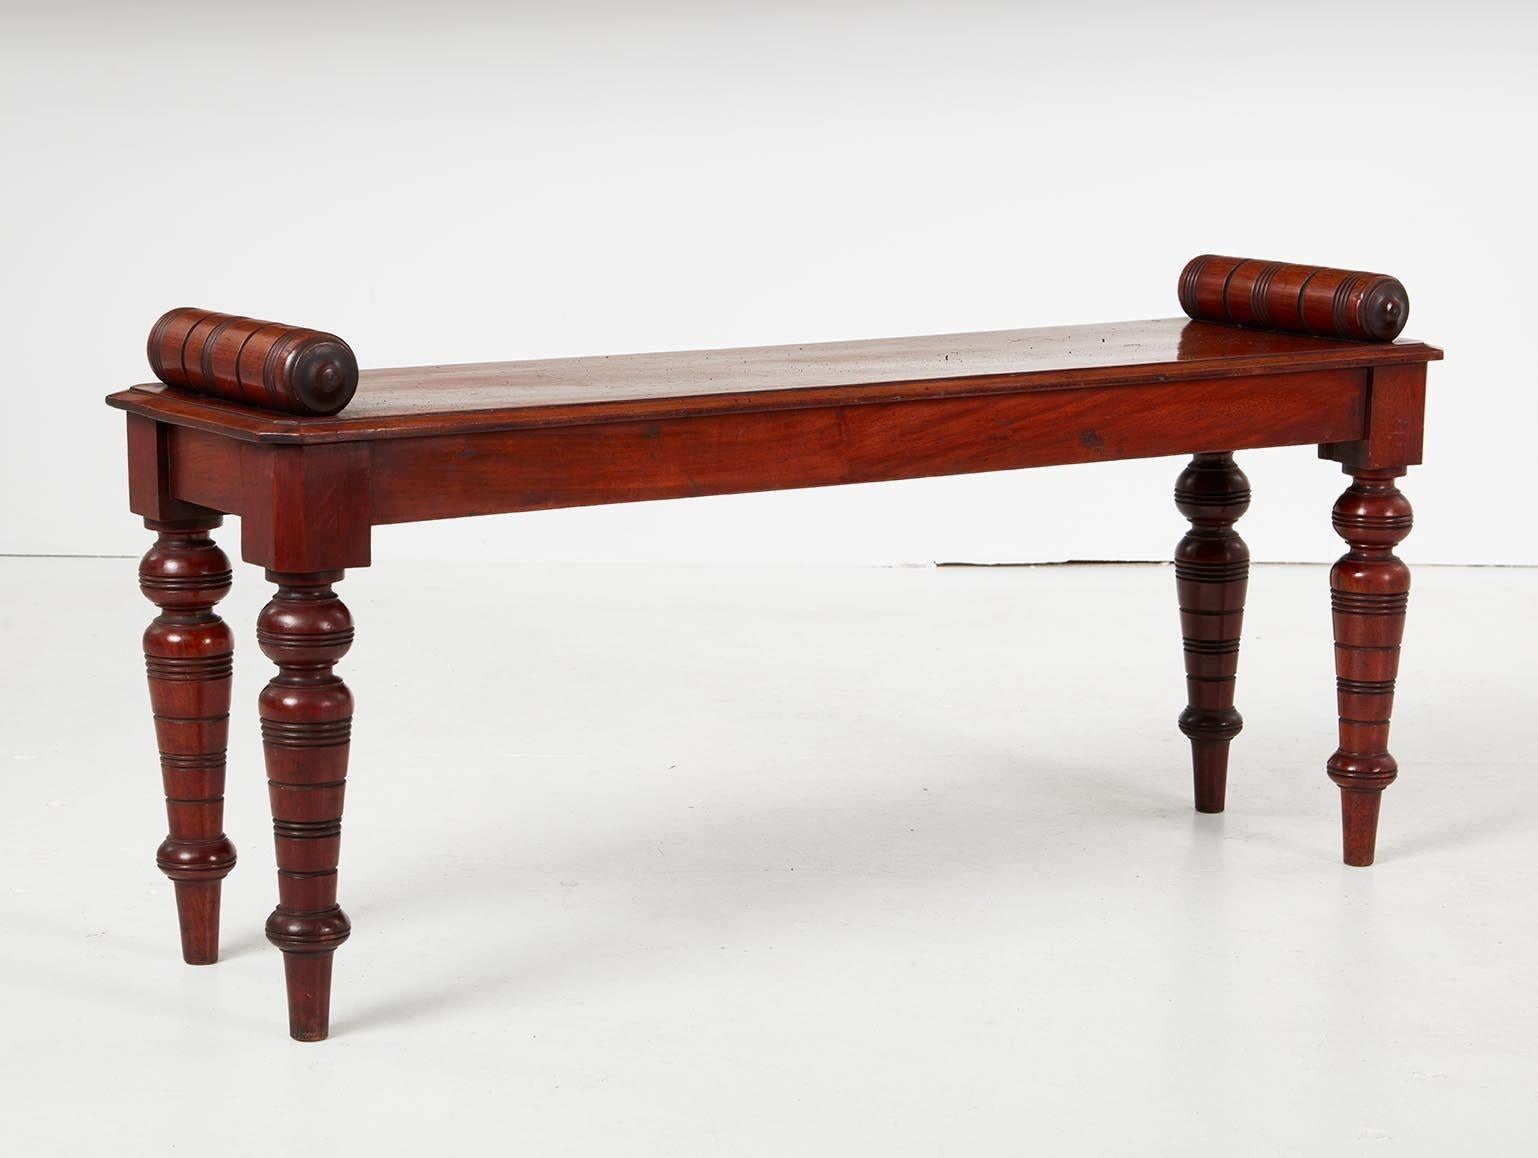 A mahogany hall bench with bolster ends above solid seat and turned, ringed legs, having very good color. William IV, circa 1835.